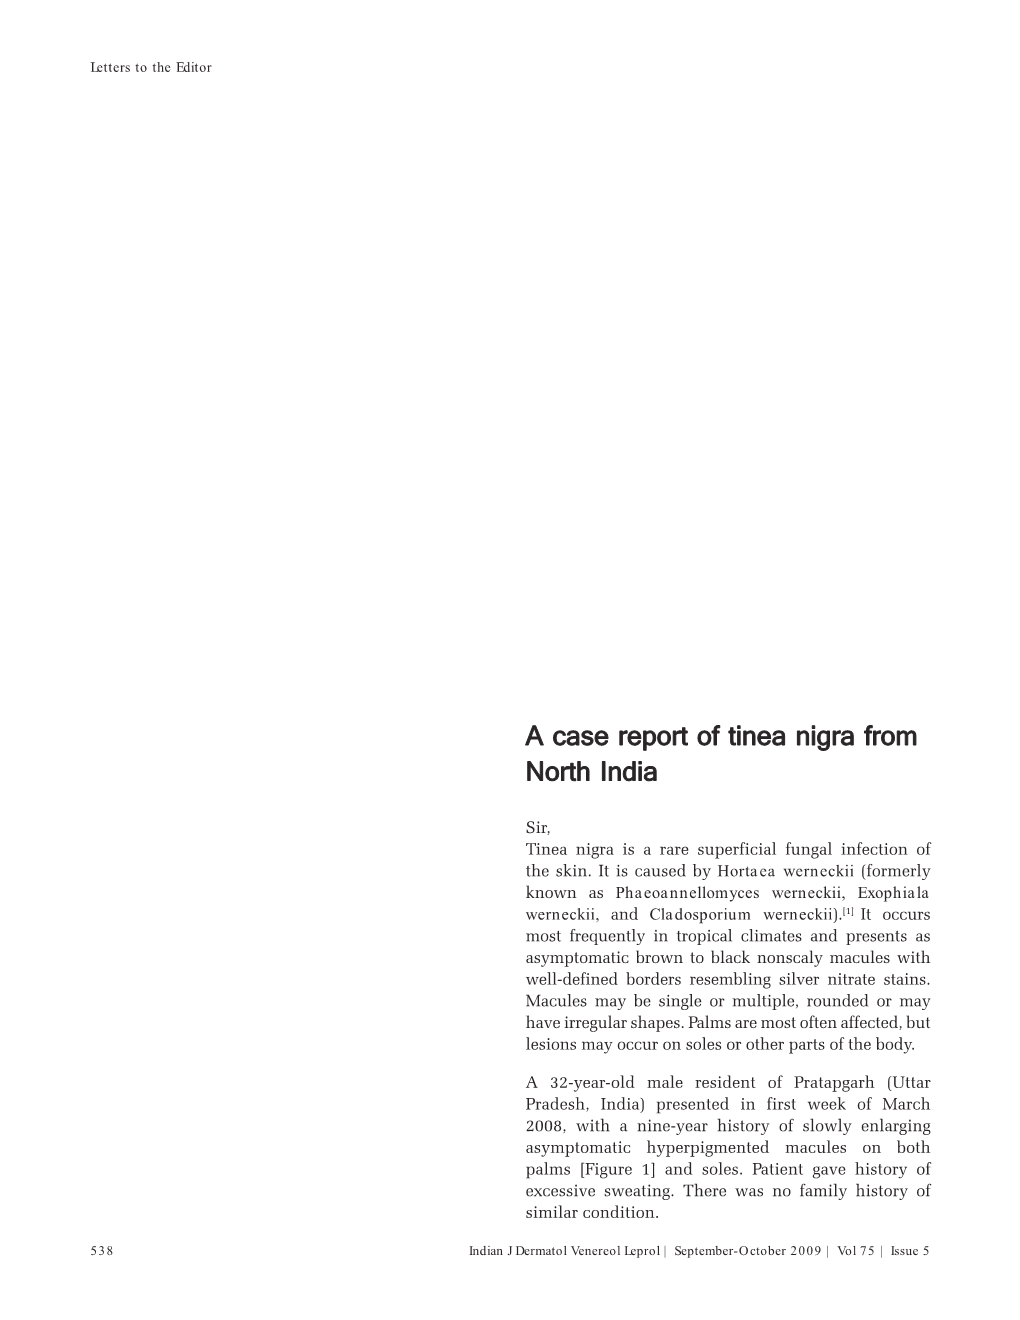 A Case Report of Tinea Nigra from North India